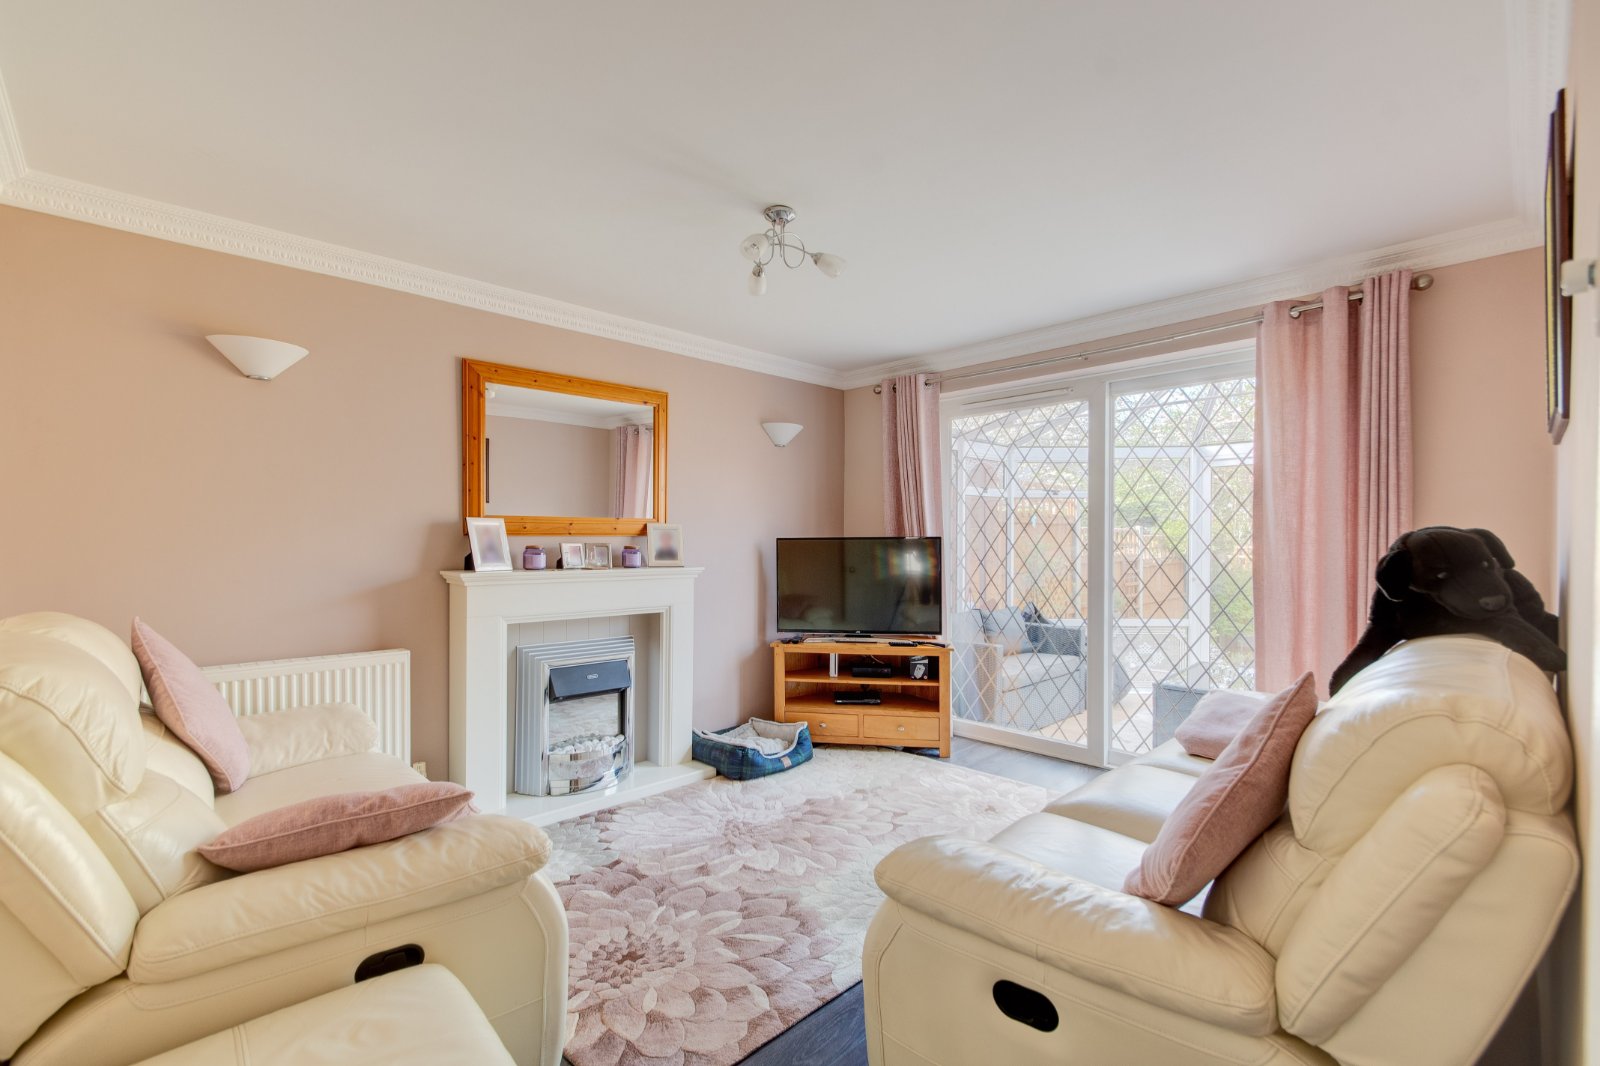 3 bed house for sale in Hopyard Lane, Winyates West  - Property Image 3